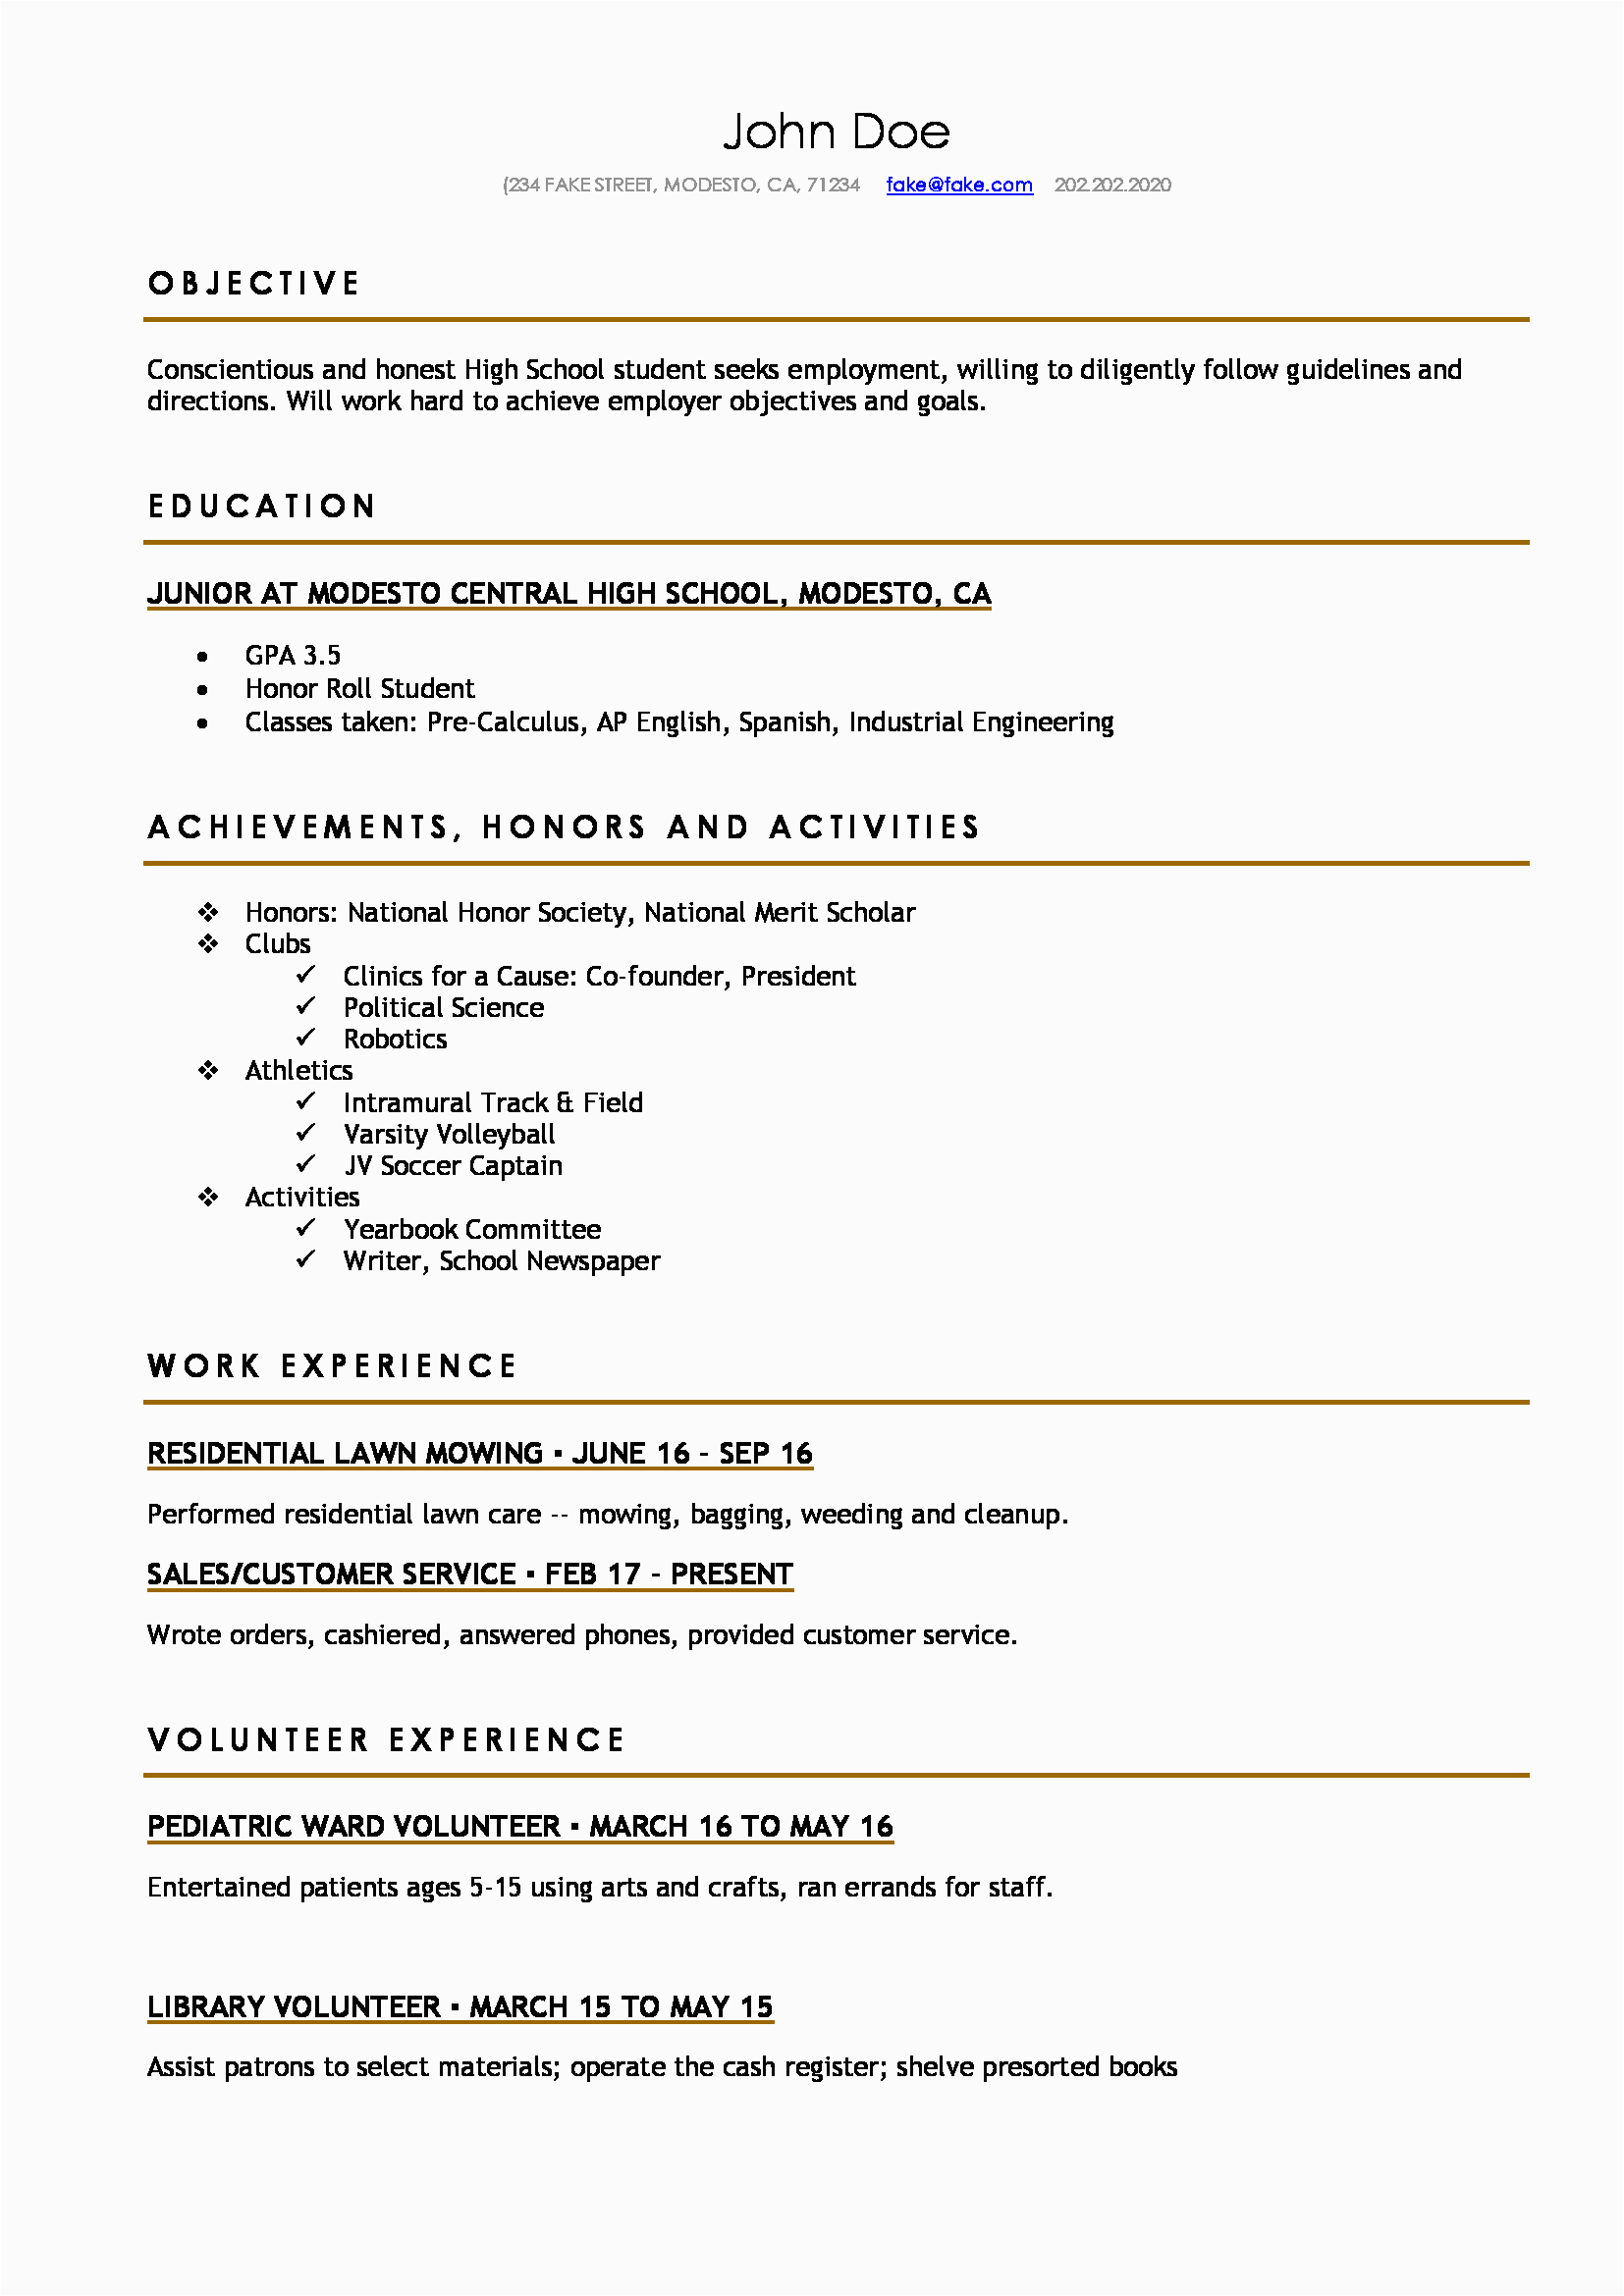 College Resume Template for Highschool Students High School Resume Resume Templates for High School